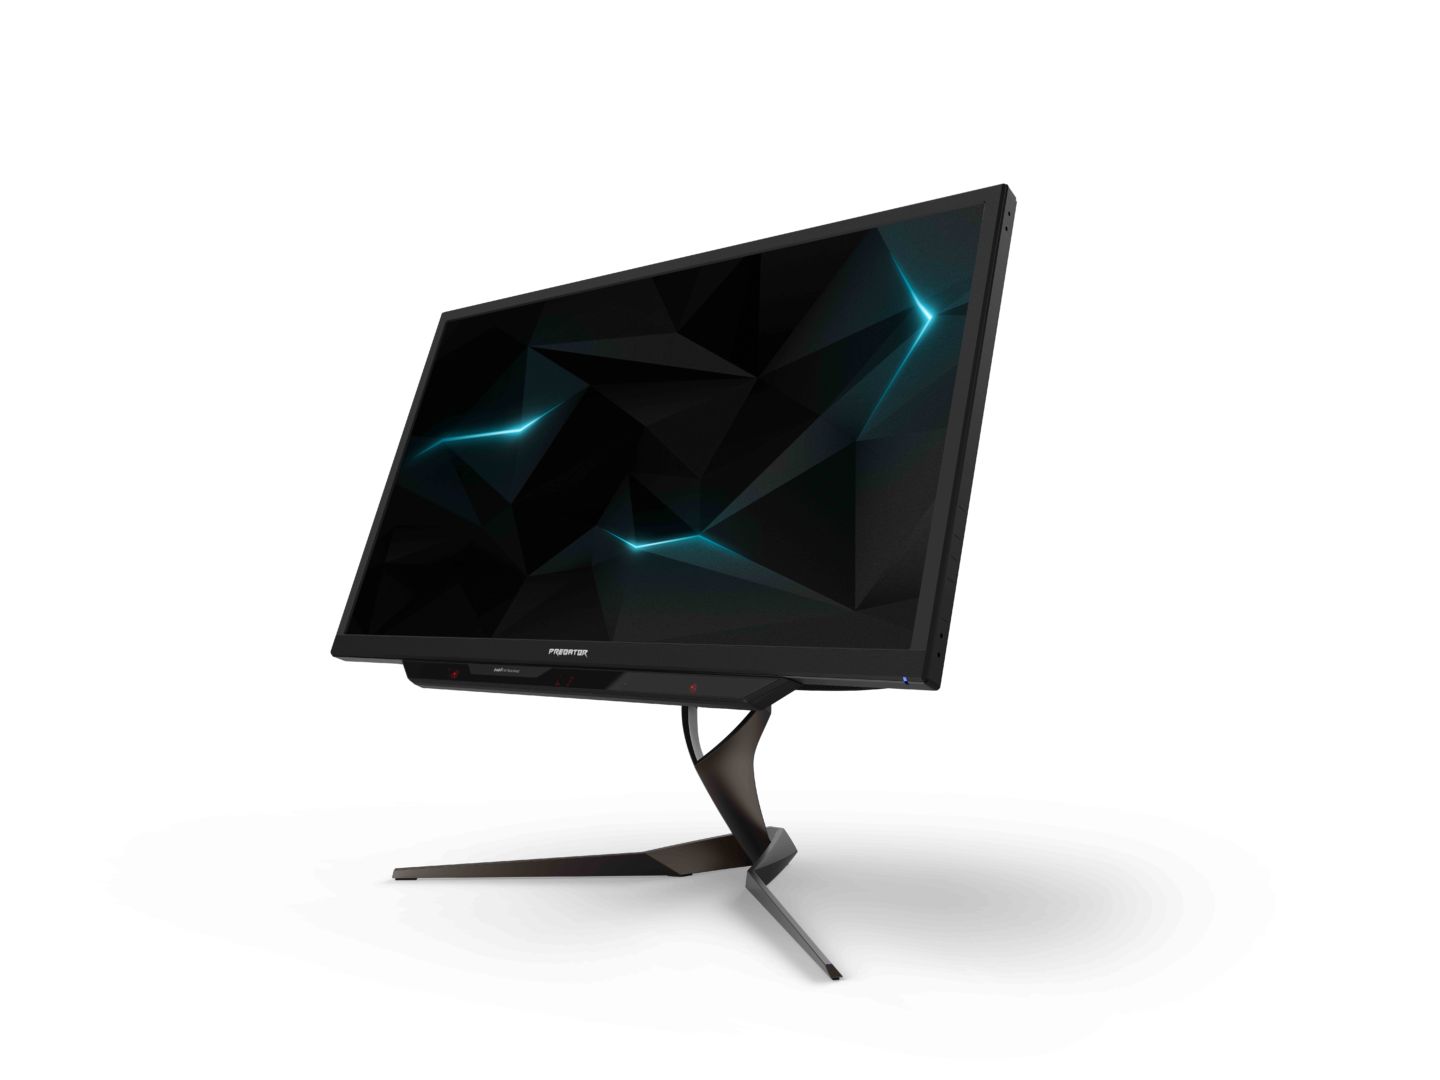 Acer Predator X27: 4K, HDR, and 144Hz G-Sync for the ultimate gaming monitor